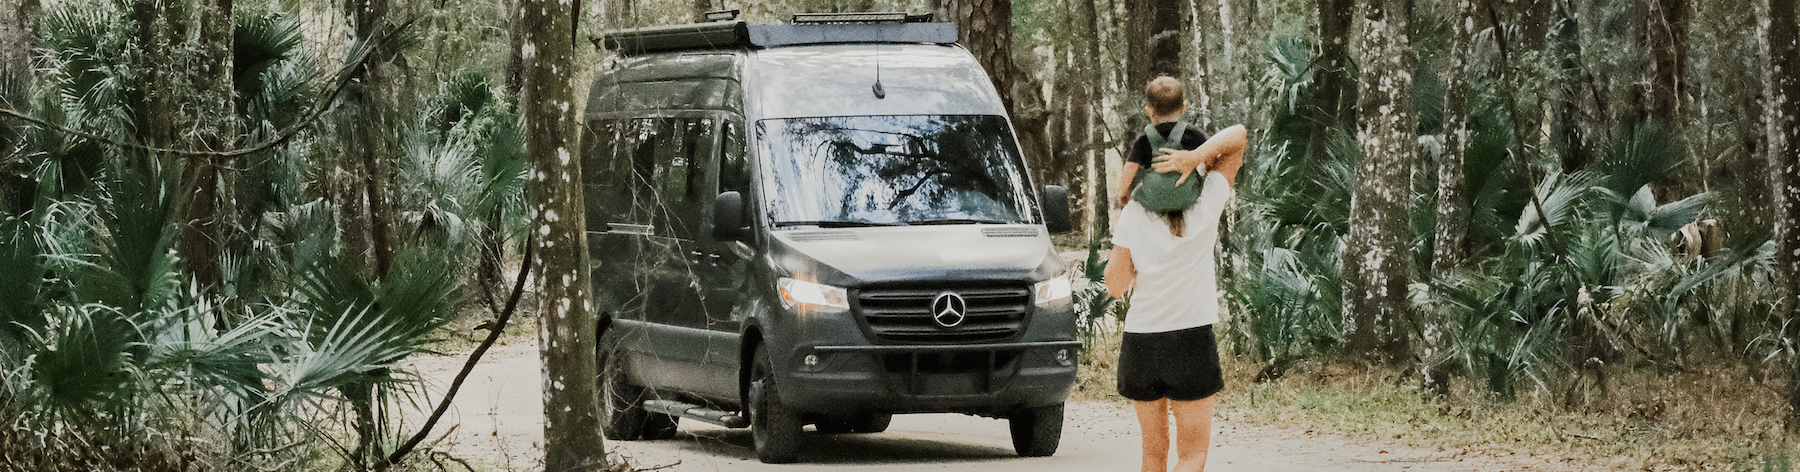 Vanlife in Florida: our guide to make your life easier under the palm trees